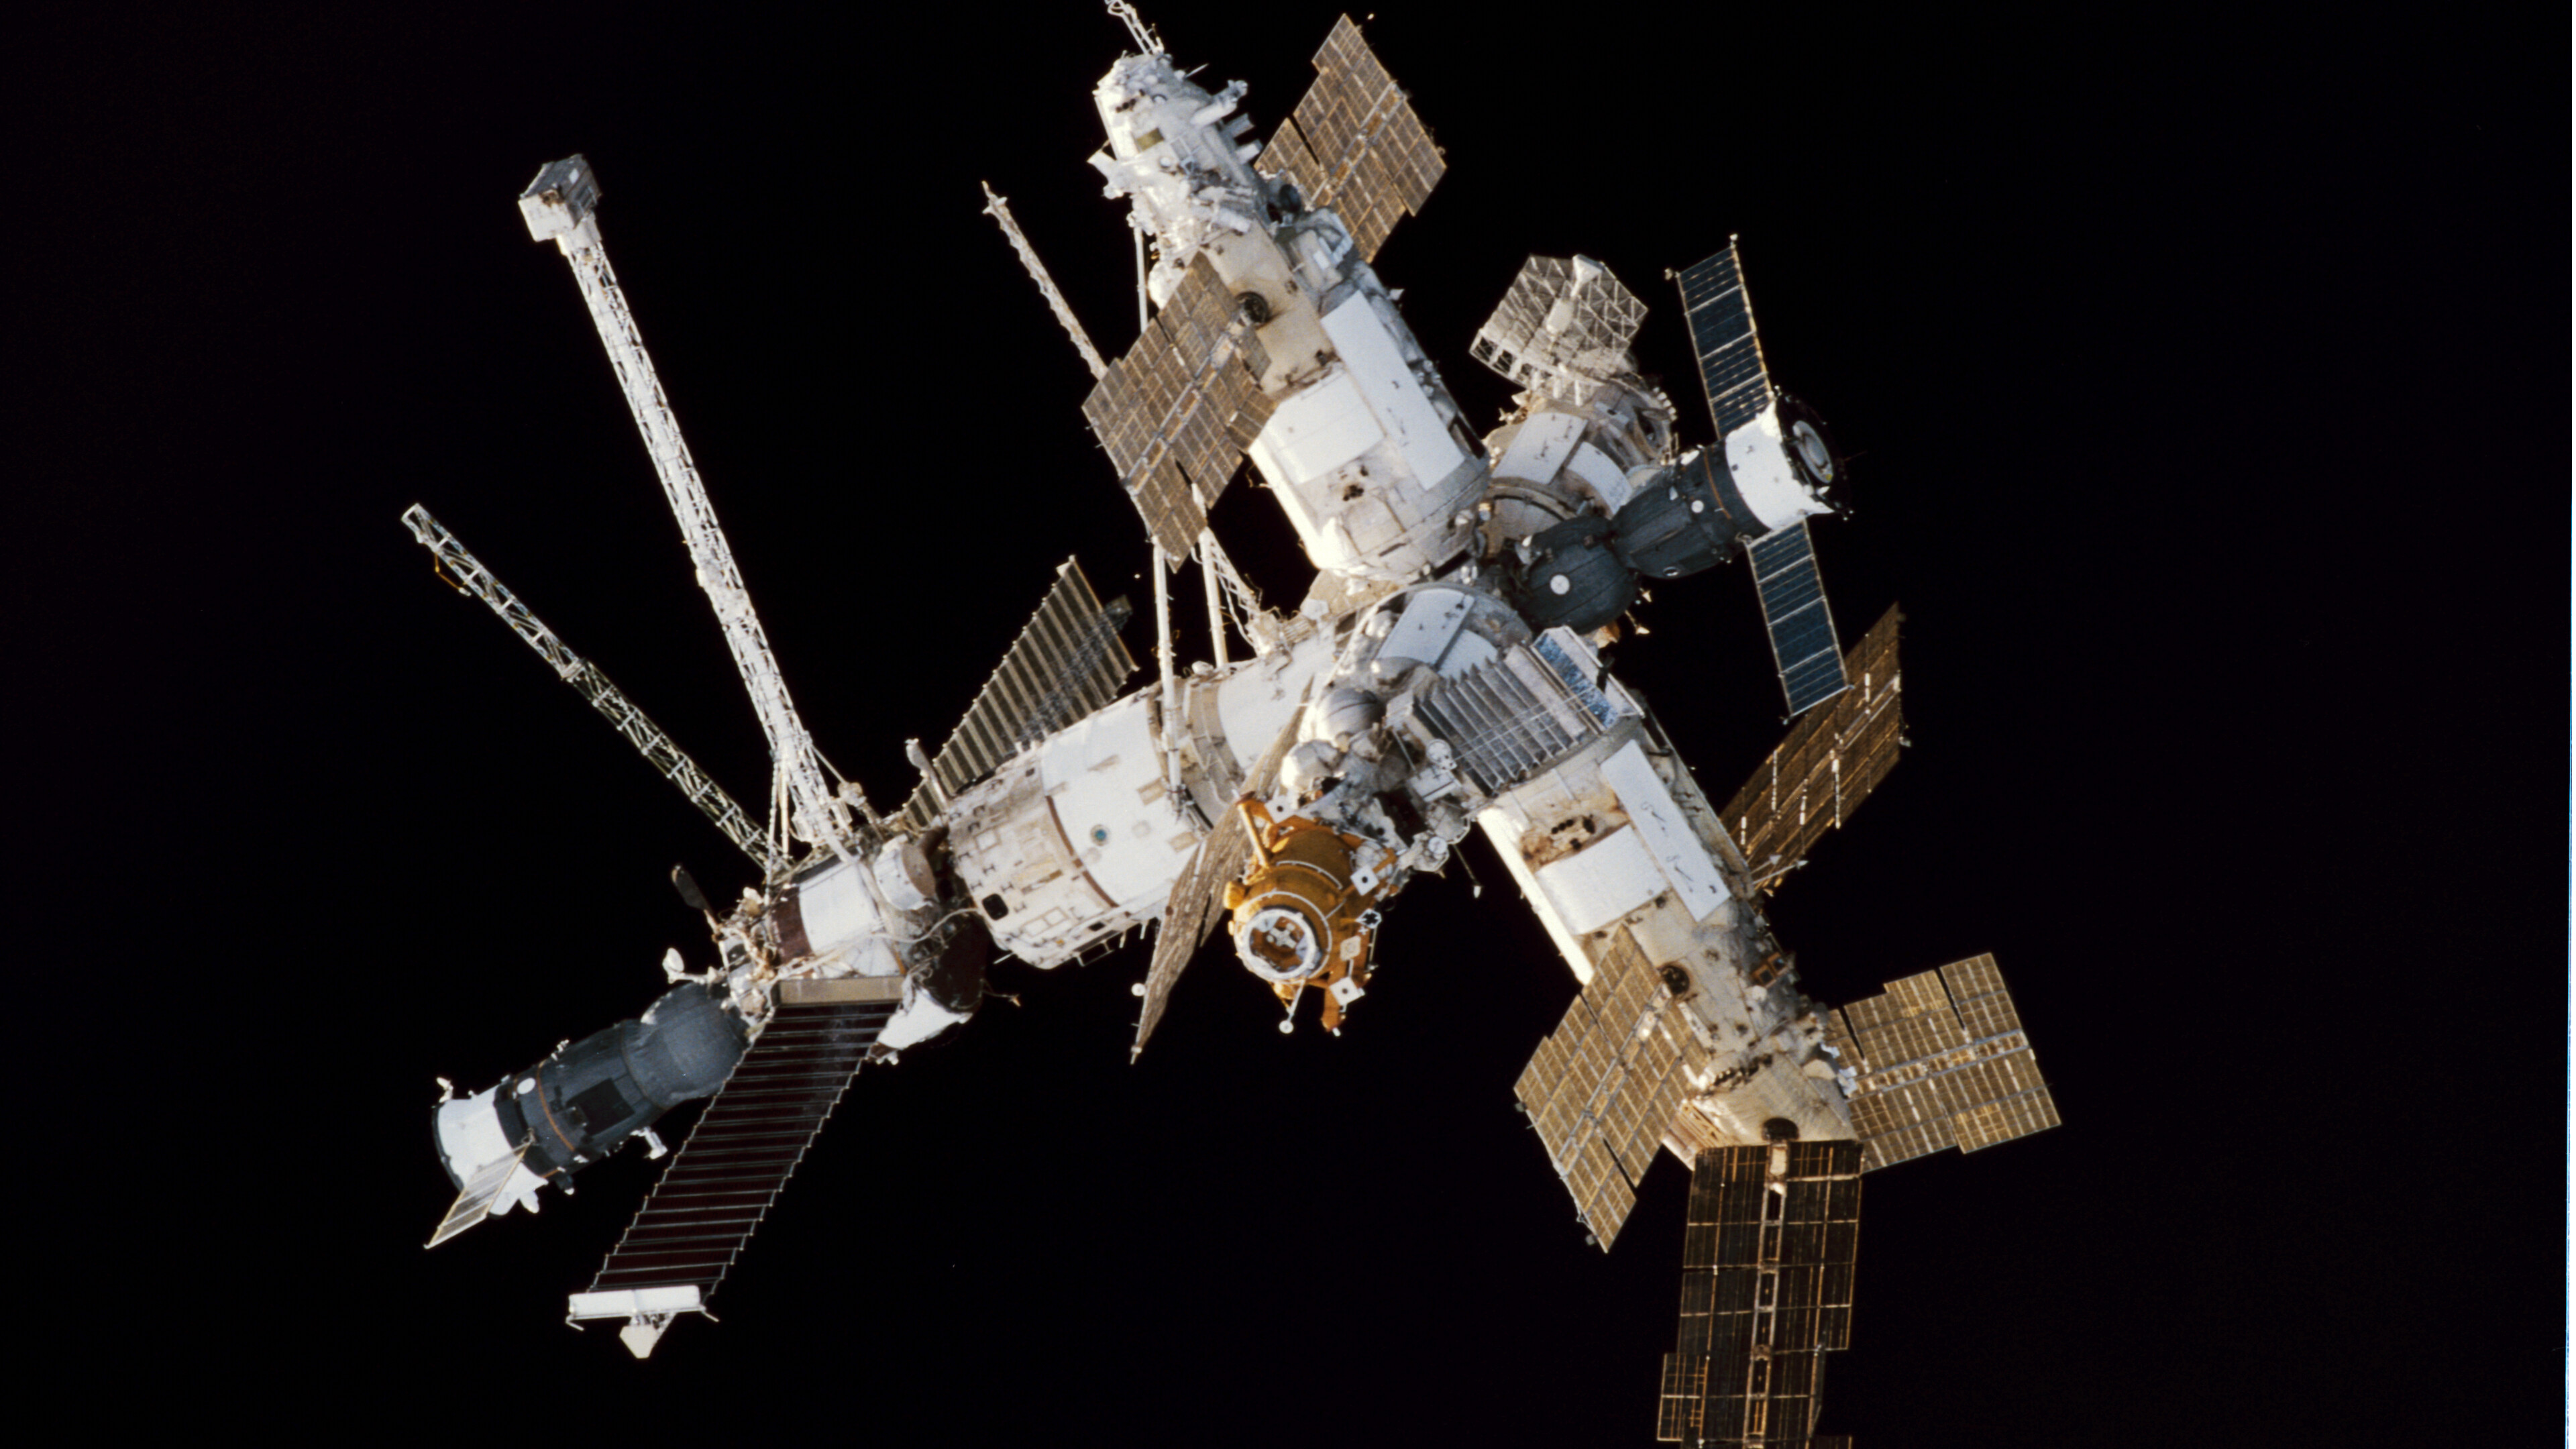 International Space Station: A multi-nation construction project, ISS, Hosted more than 250 people since 1998. 3840x2160 4K Wallpaper.